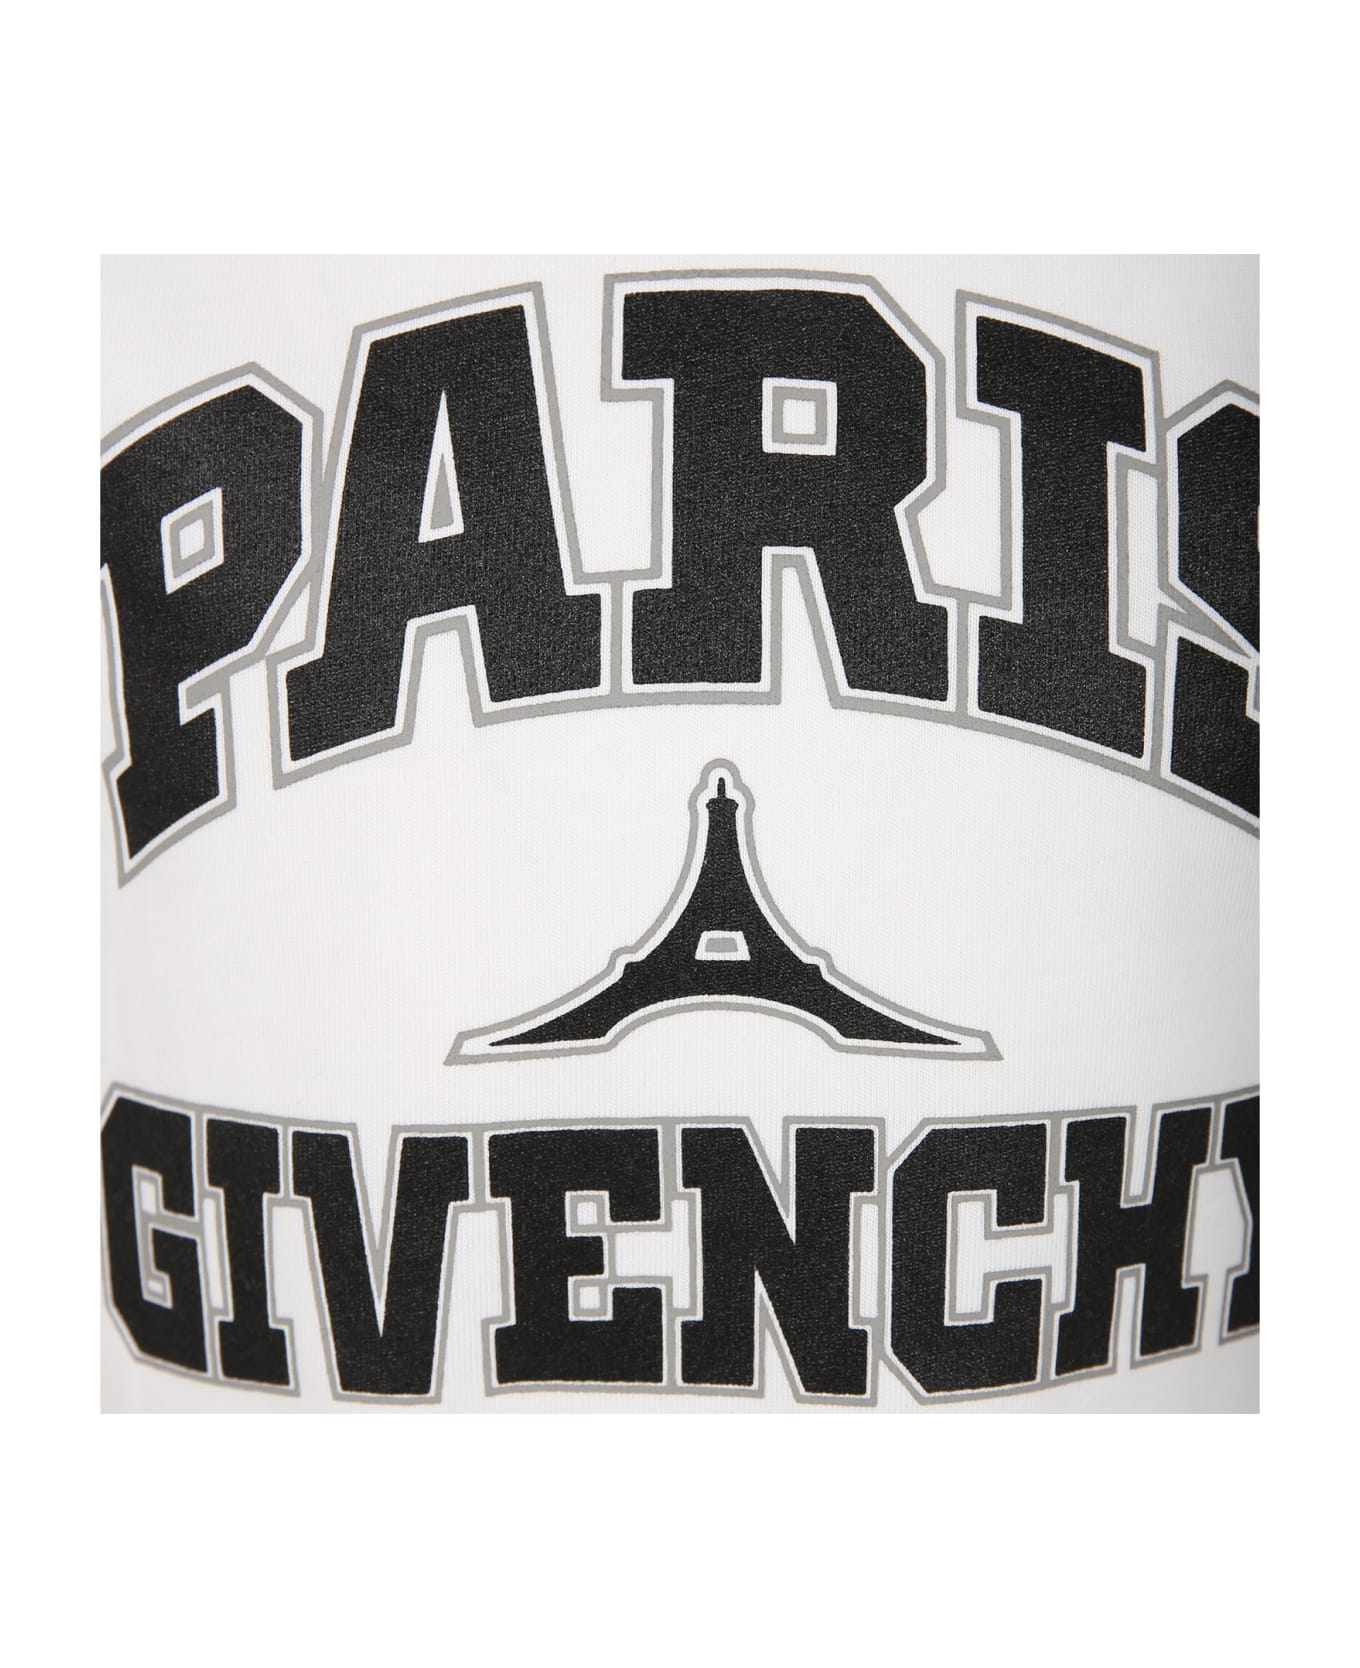 Givenchy White T-shirt For Boy With Logo - White